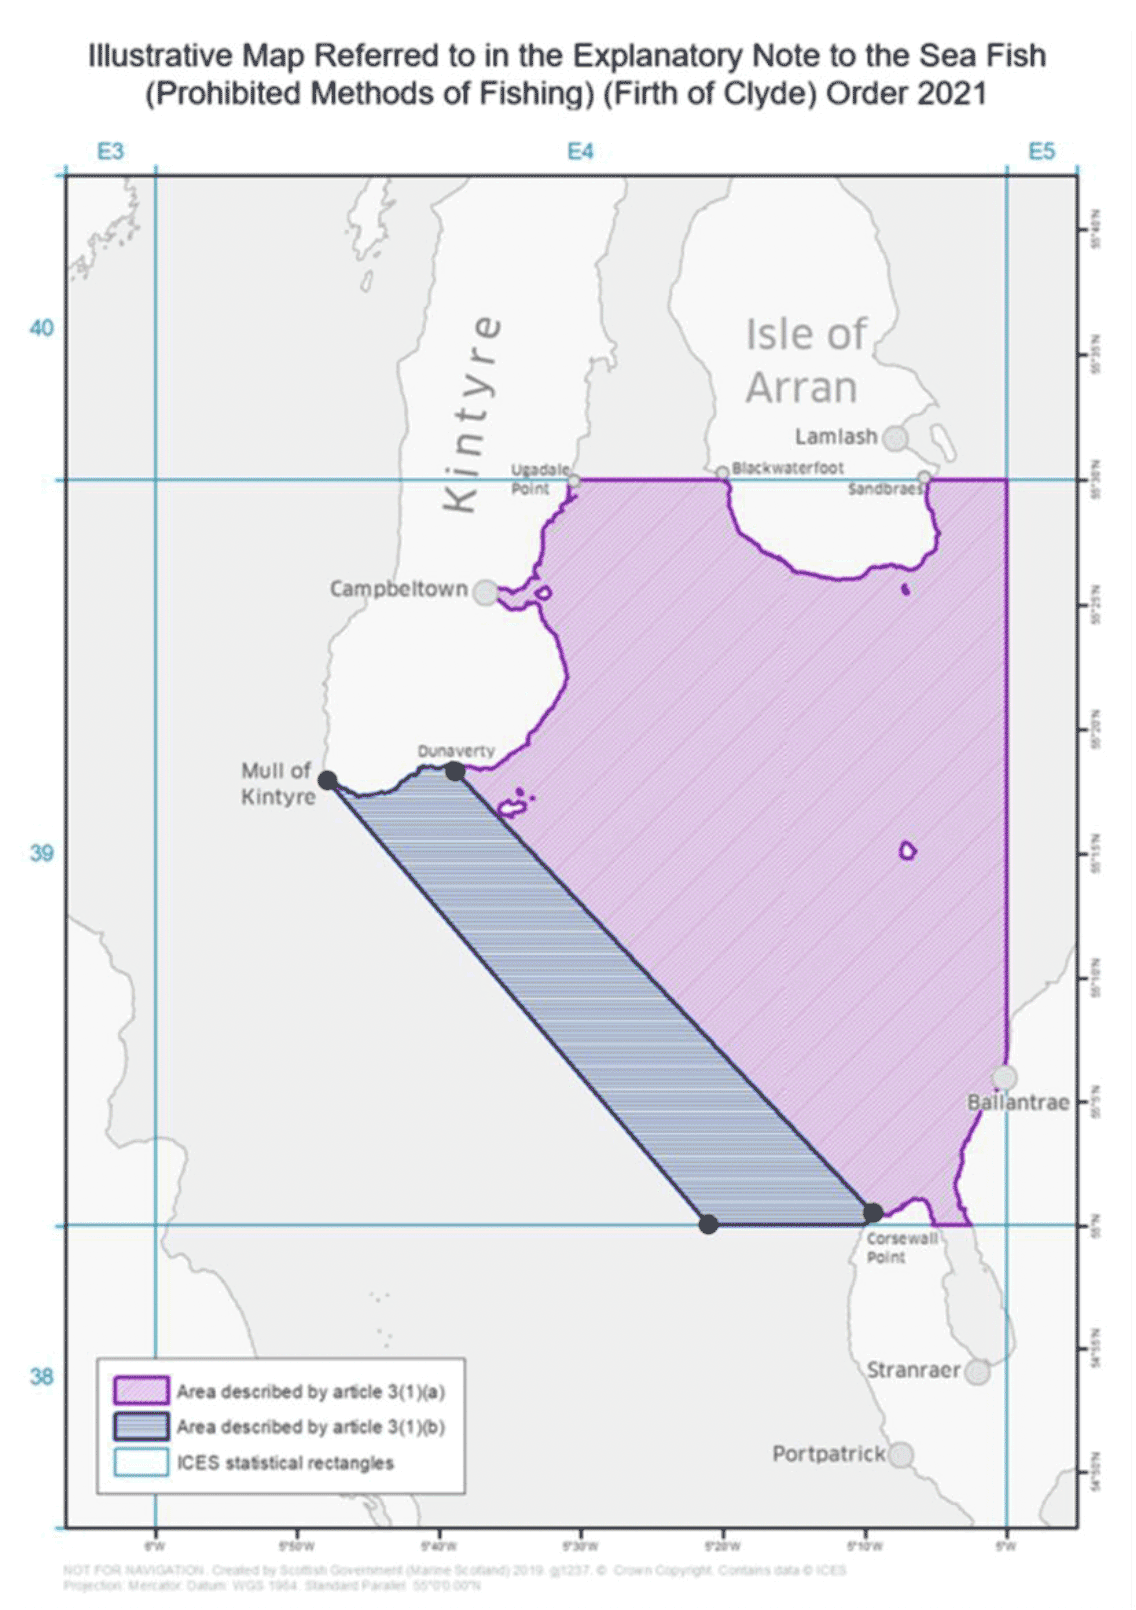 losure of the Firth of Clyde as set out in the Explanatory Note to the Sea Fish (Prohibited Methods of Fishing) (Firth of Clyde) Order 2021. The closure is split into two sections – the larger area described in article 3(1)(a) and the smaller area described in article 3(1)(b)